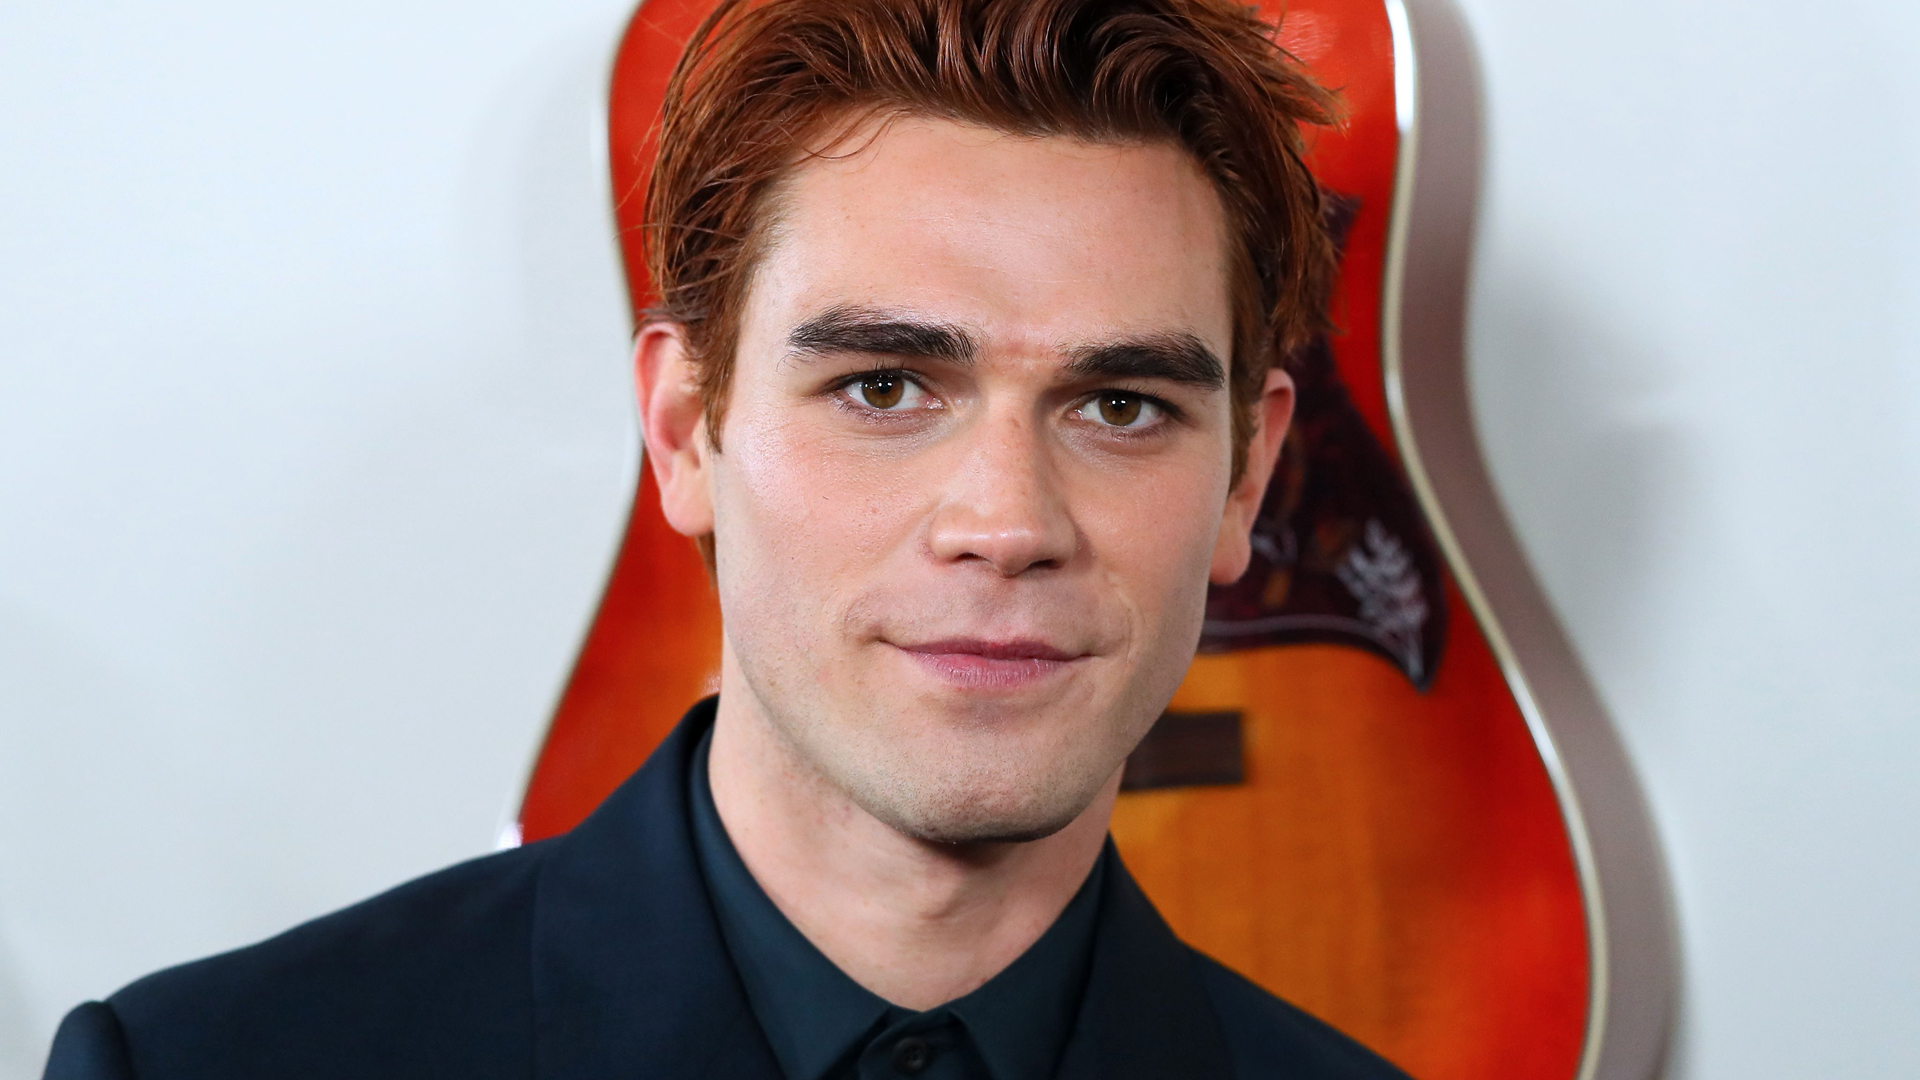 ‘Riverdale’ actor KJ Apa arrives for the special screening of Lionsgate's "I Still Believe" at the Archlight in Hollywood, California on March 7, 2020.